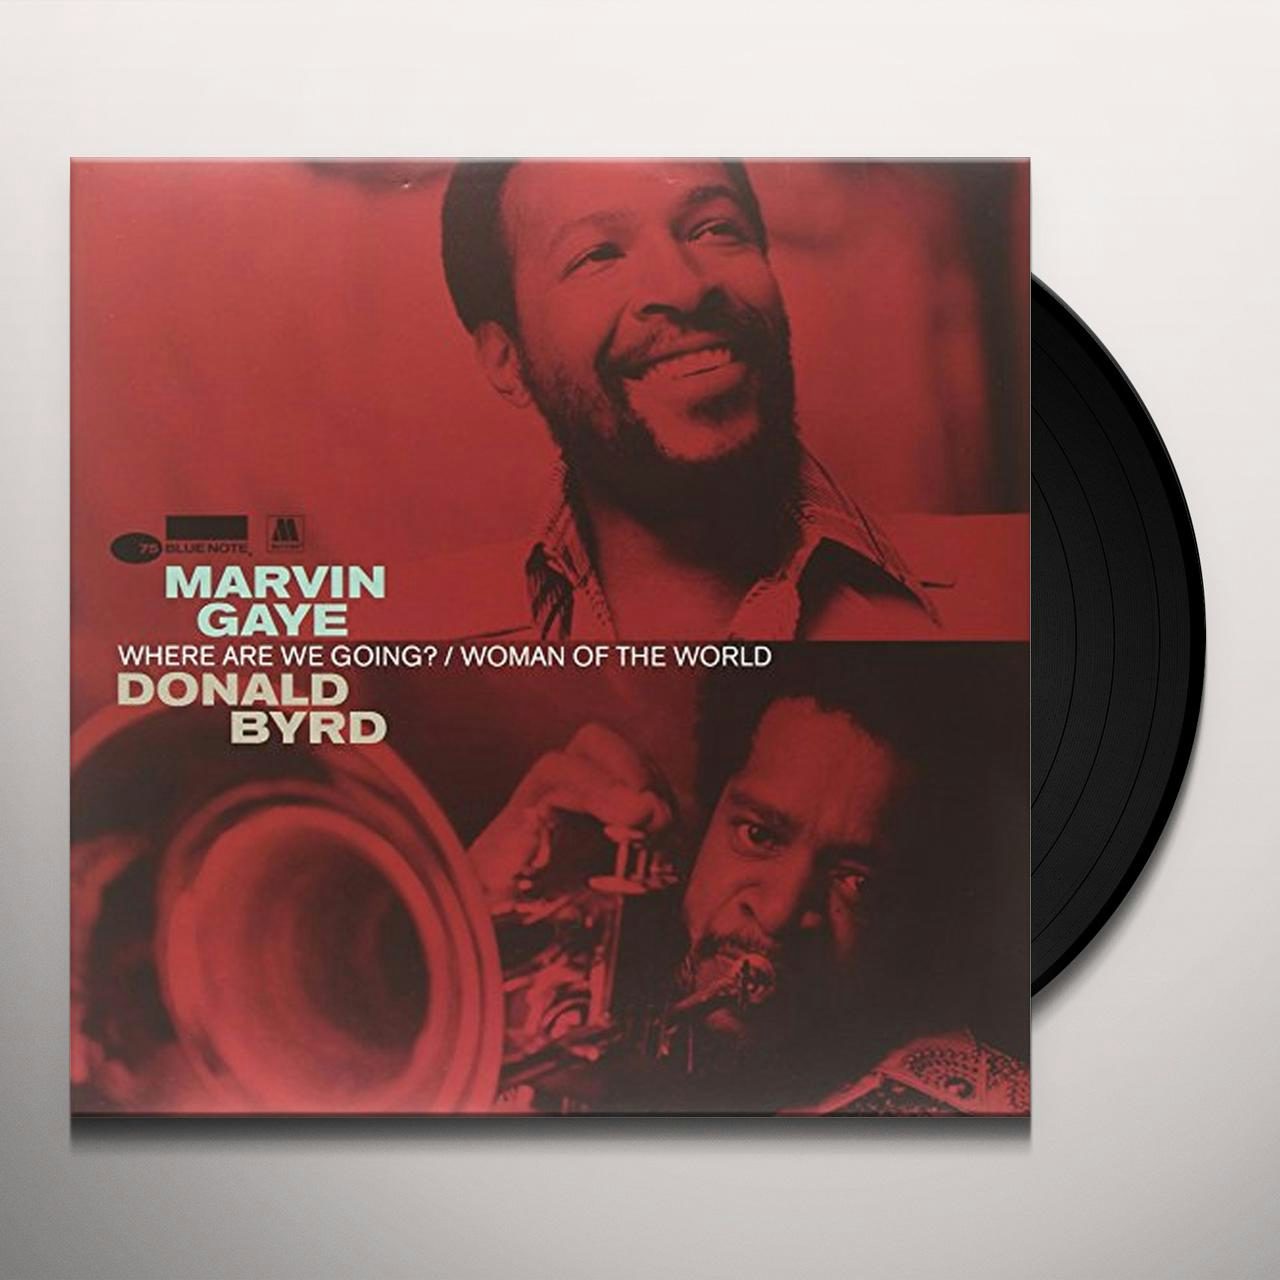 MARVIN GAYE / WHERE ARE WE GOING? 7q4Jt-m57206998322 | mubec.com.br